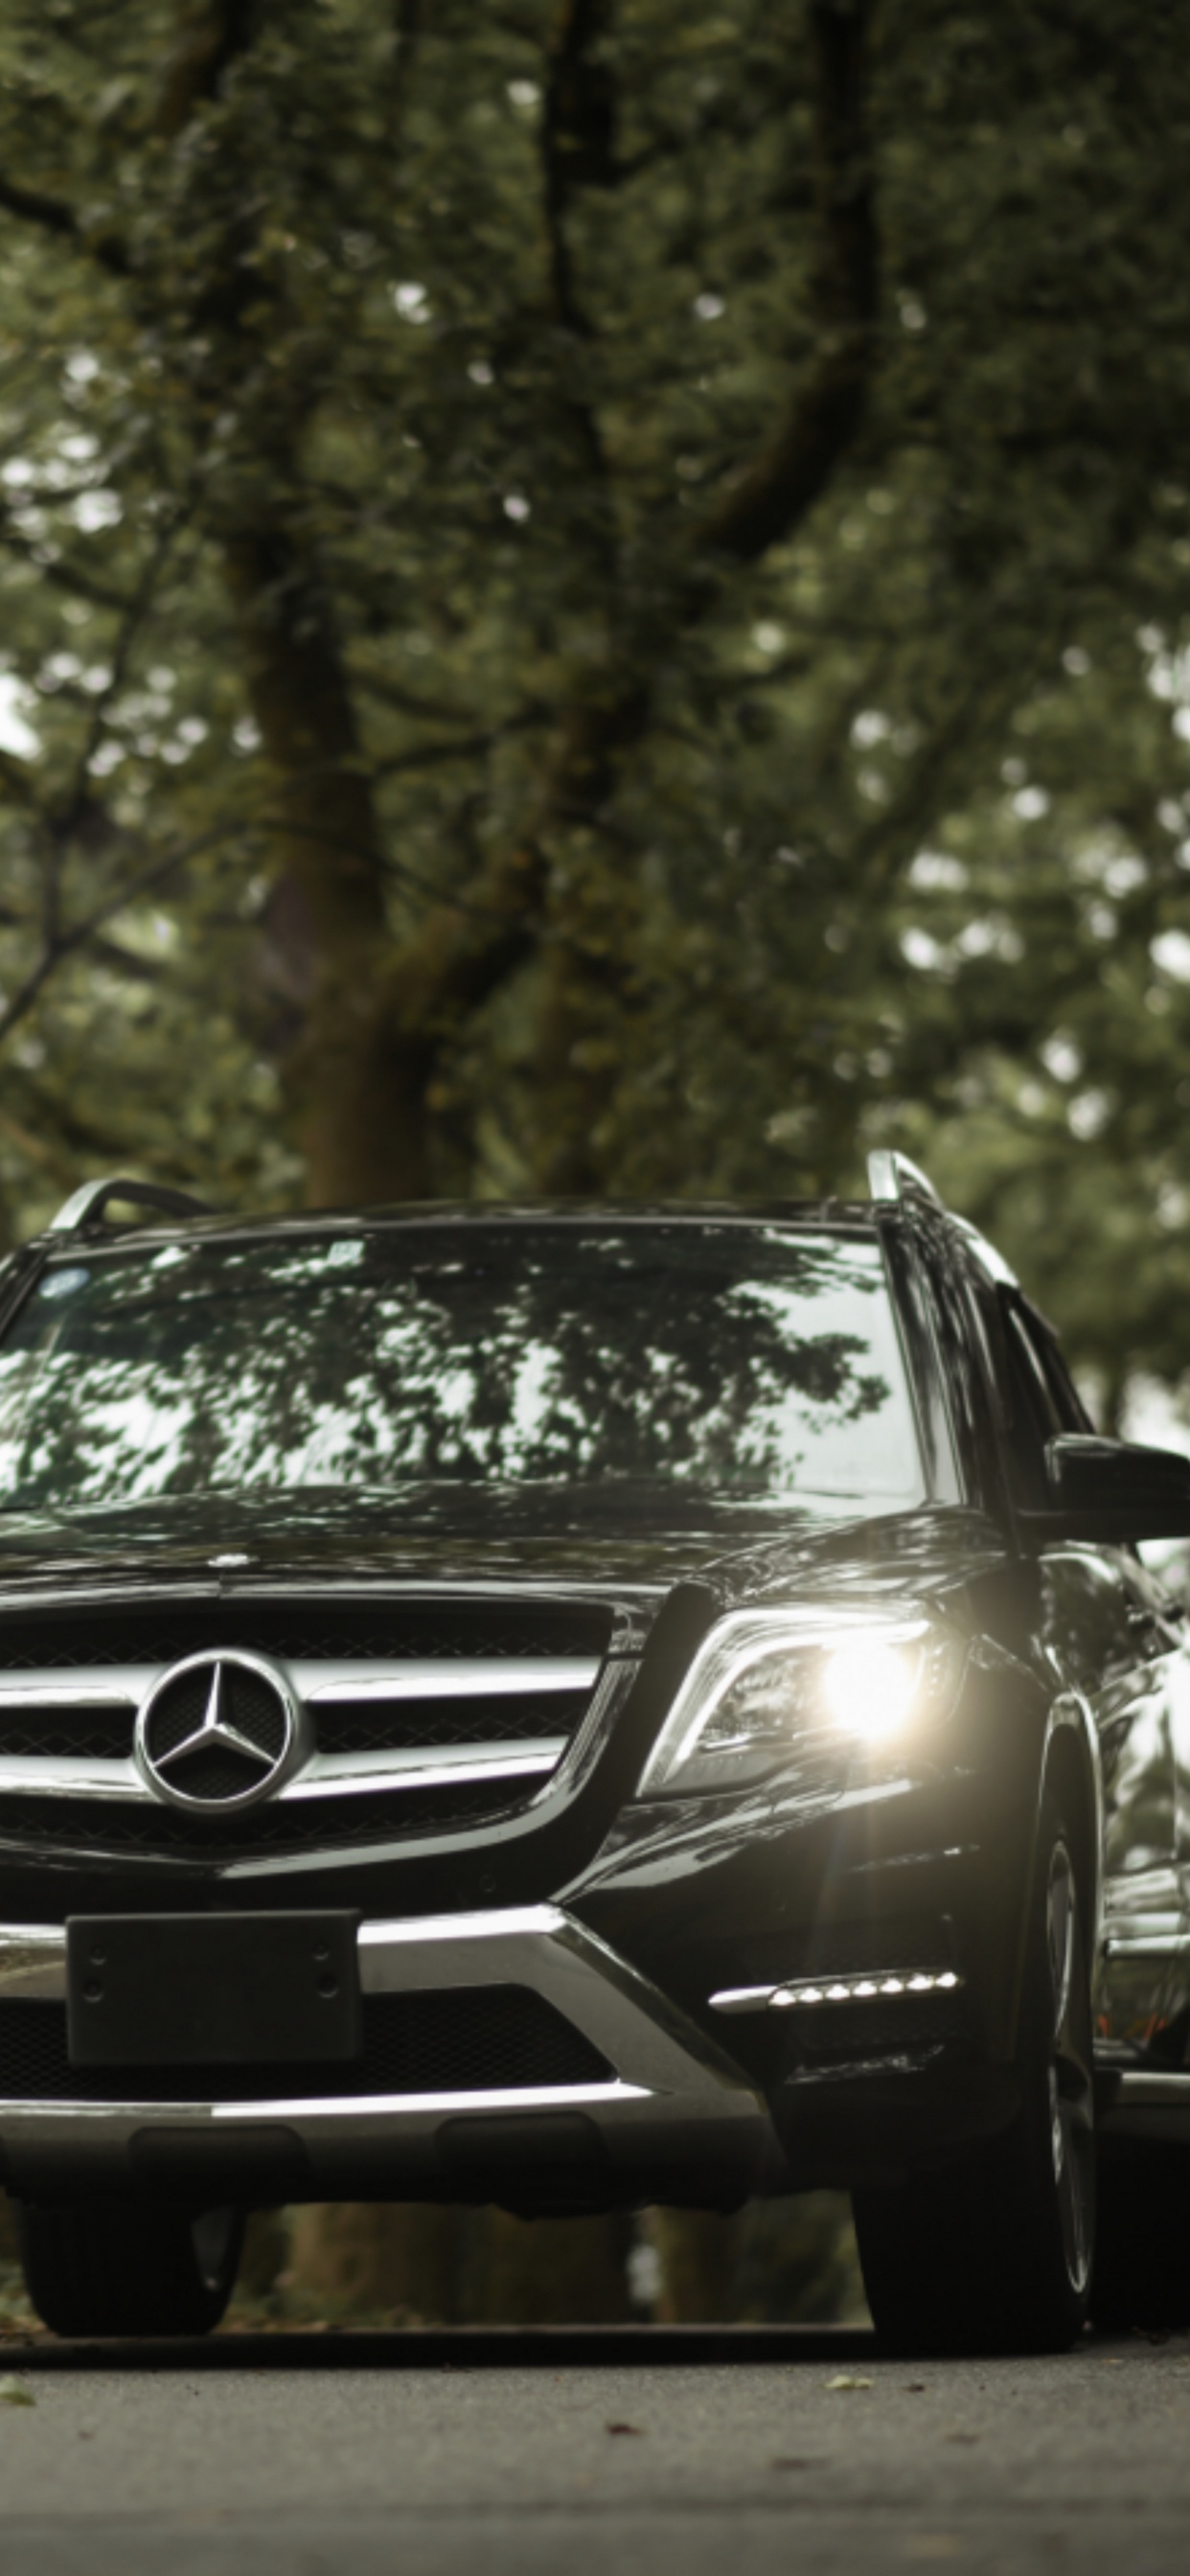 Black Mercedes Benz Car on Forest During Daytime. Wallpaper in 1242x2688 Resolution